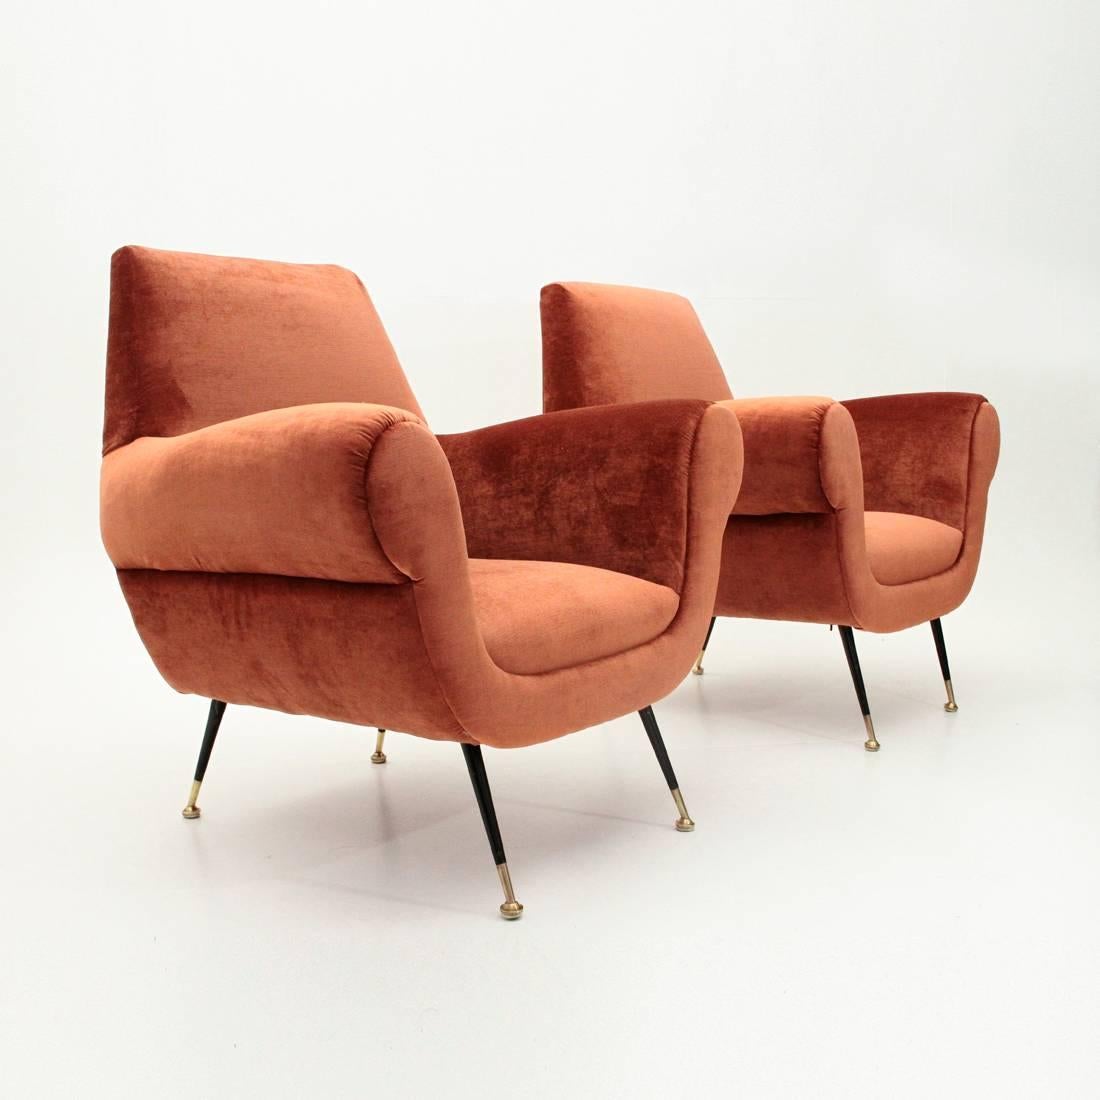 Pair of armchairs produced by Minotti based on a design by Gigi Radice.
Padded wooden structure lined with new pink velvet fabric.
Legs in black painted metal with brass terminal.
Excellent general conditions.

Dimensions: Width 85 cm, depth 72